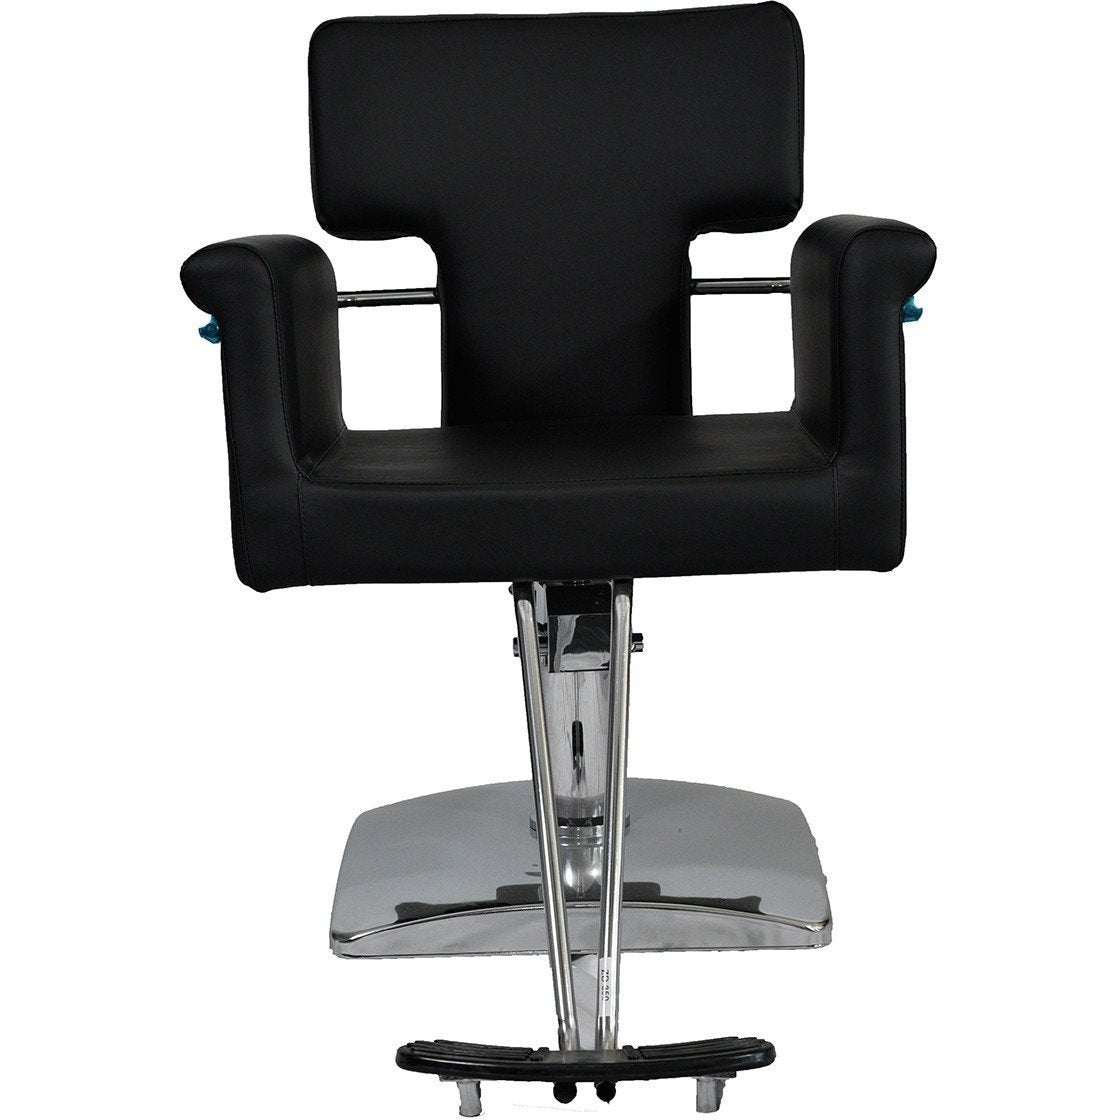 Essential Spa Equipment - Styling Chair #3